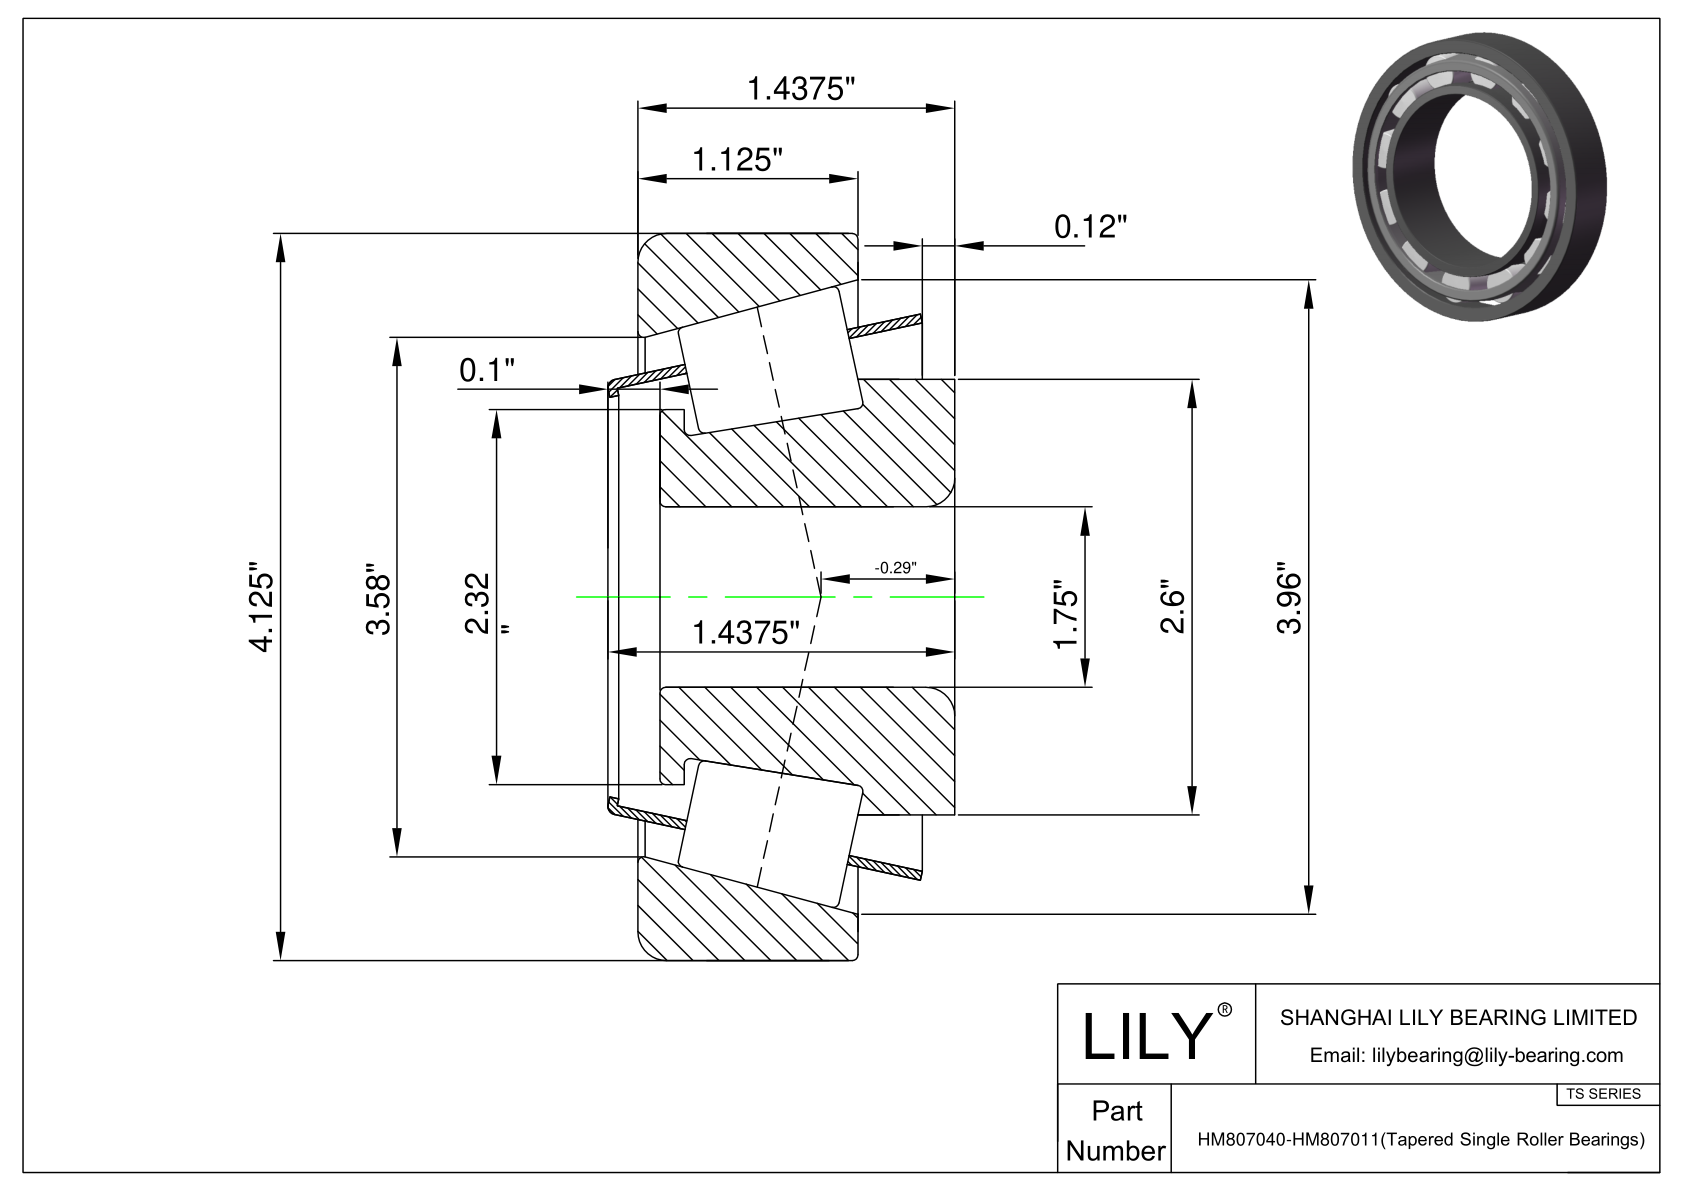 HM807040-HM807011 TS (Tapered Single Roller Bearings) (Imperial) cad drawing